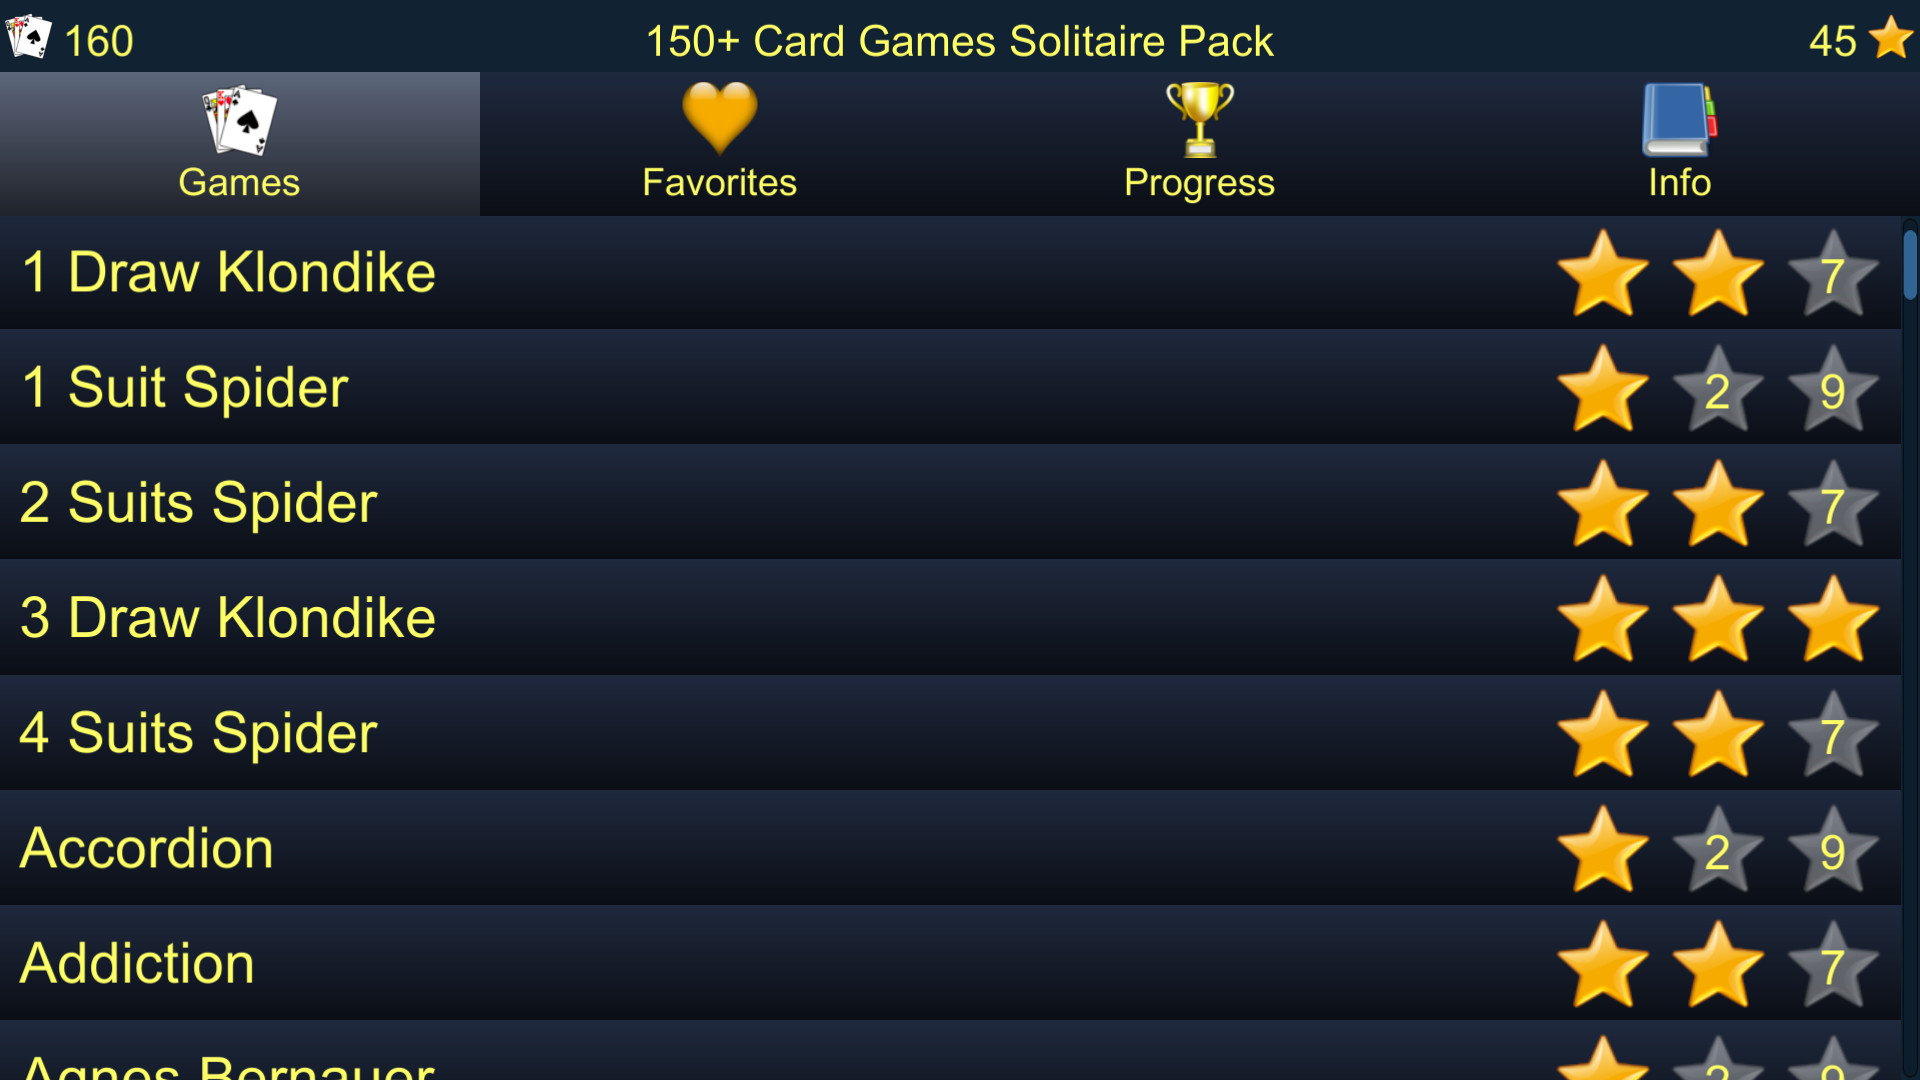 150+ Card Games Solitaire Pack Steam CD Key, $0.63